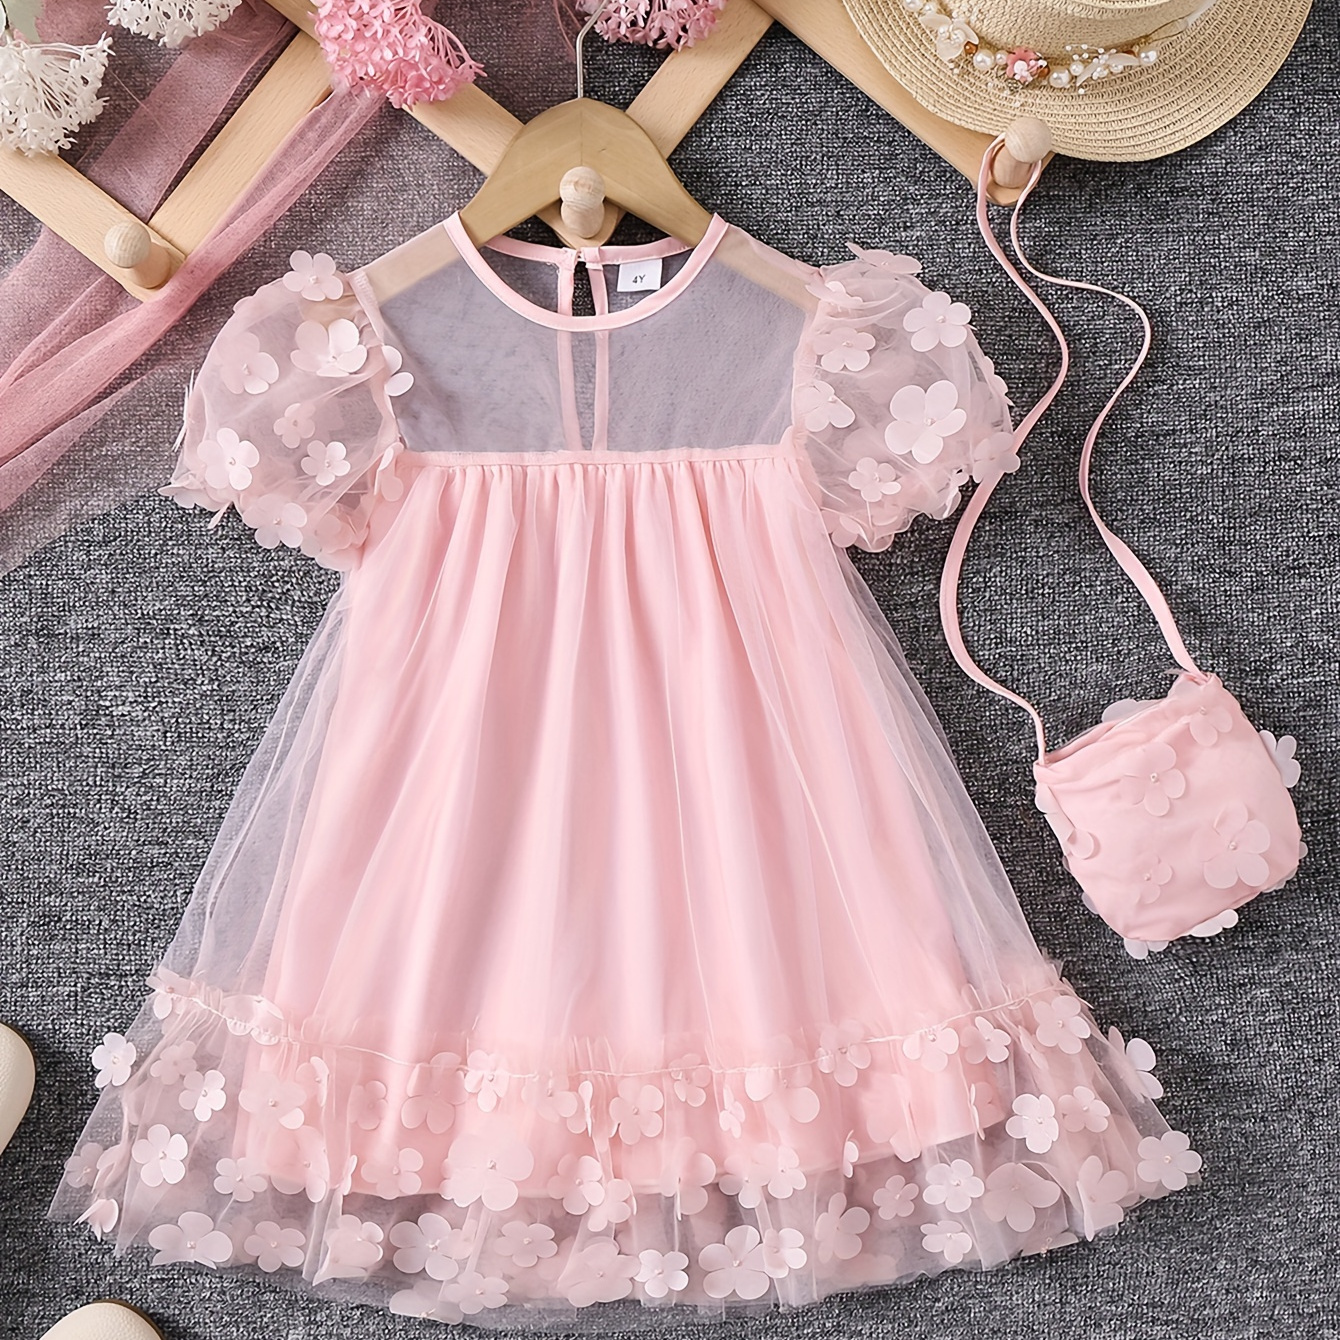 

Sweet Flower Decor Girls Puff Short Sleeve Princess Tutu Dress With Bag, Dreamy Mesh Dress For Summer Party Gift Holiday